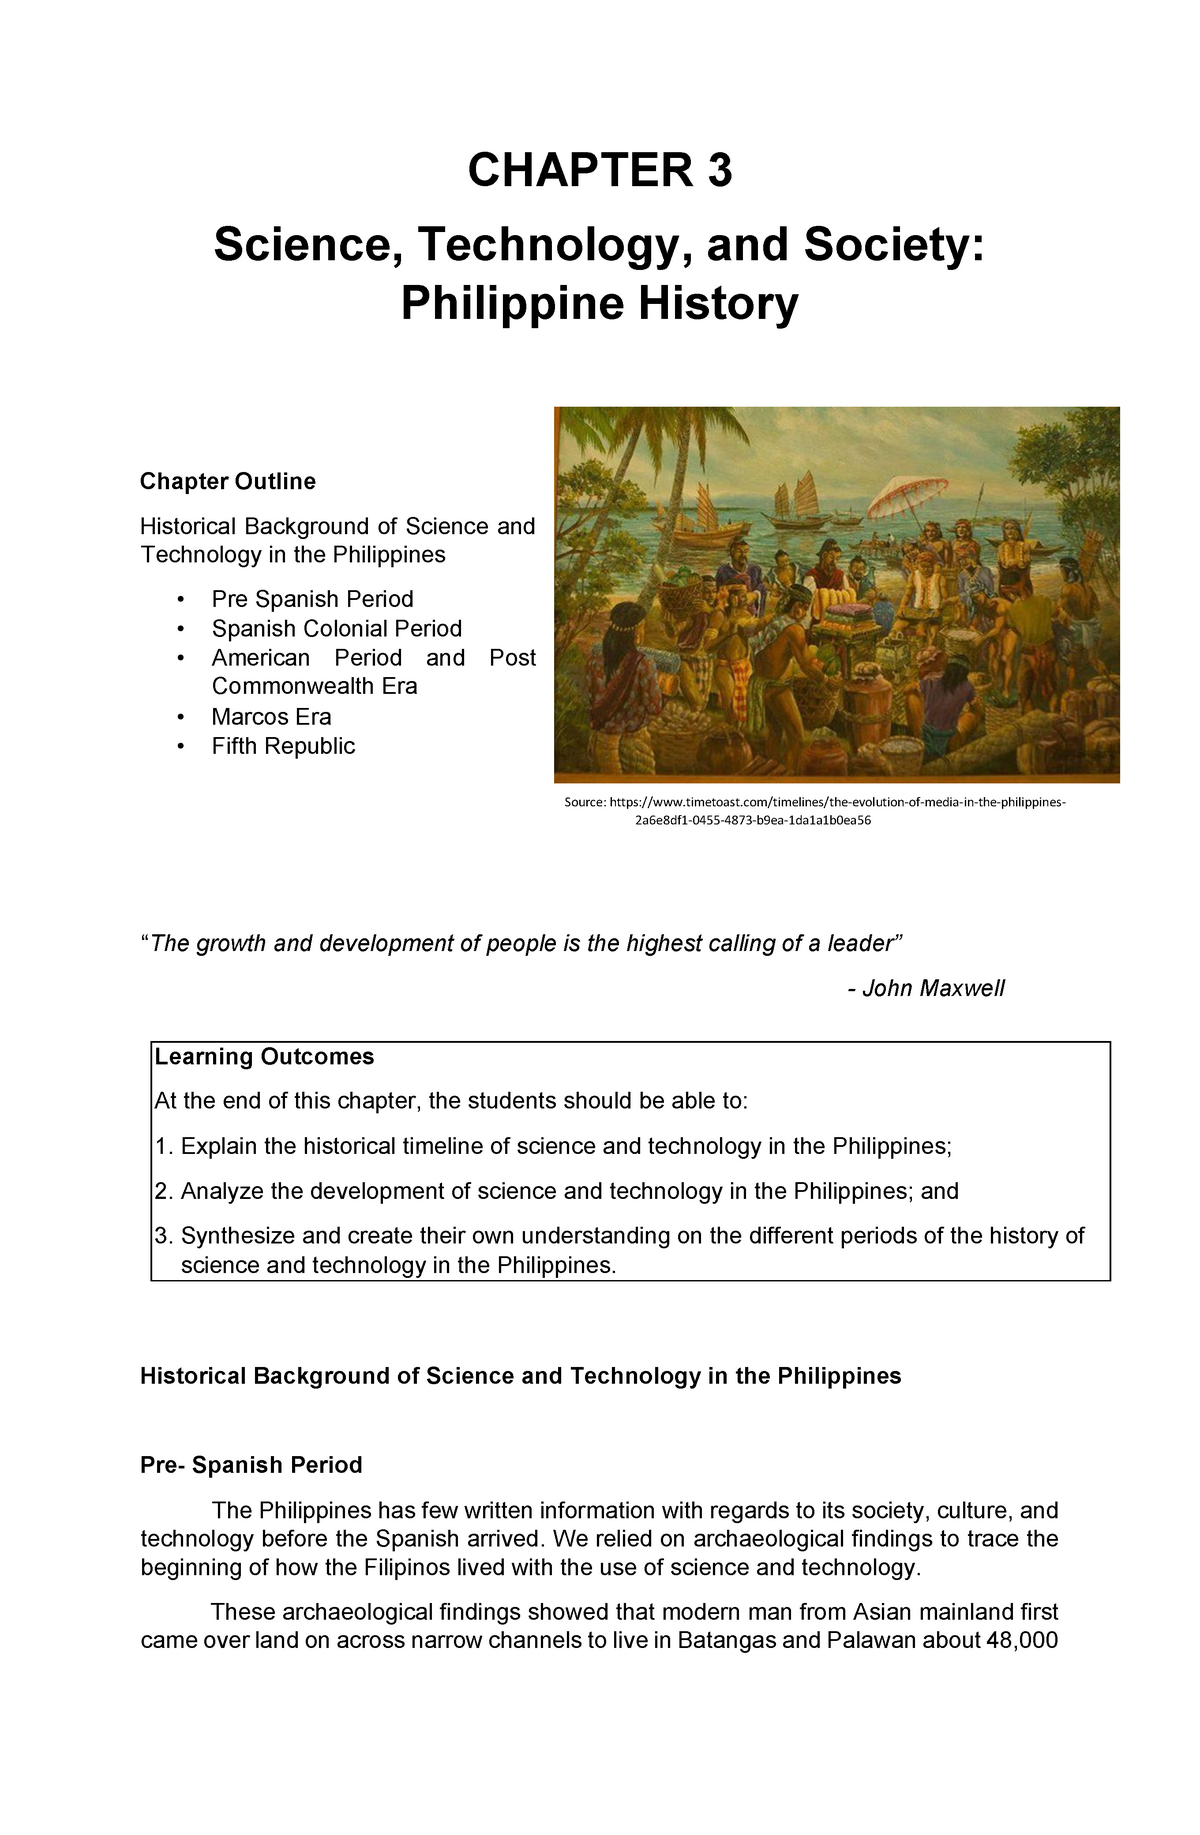 history of science and technology in the philippines essay